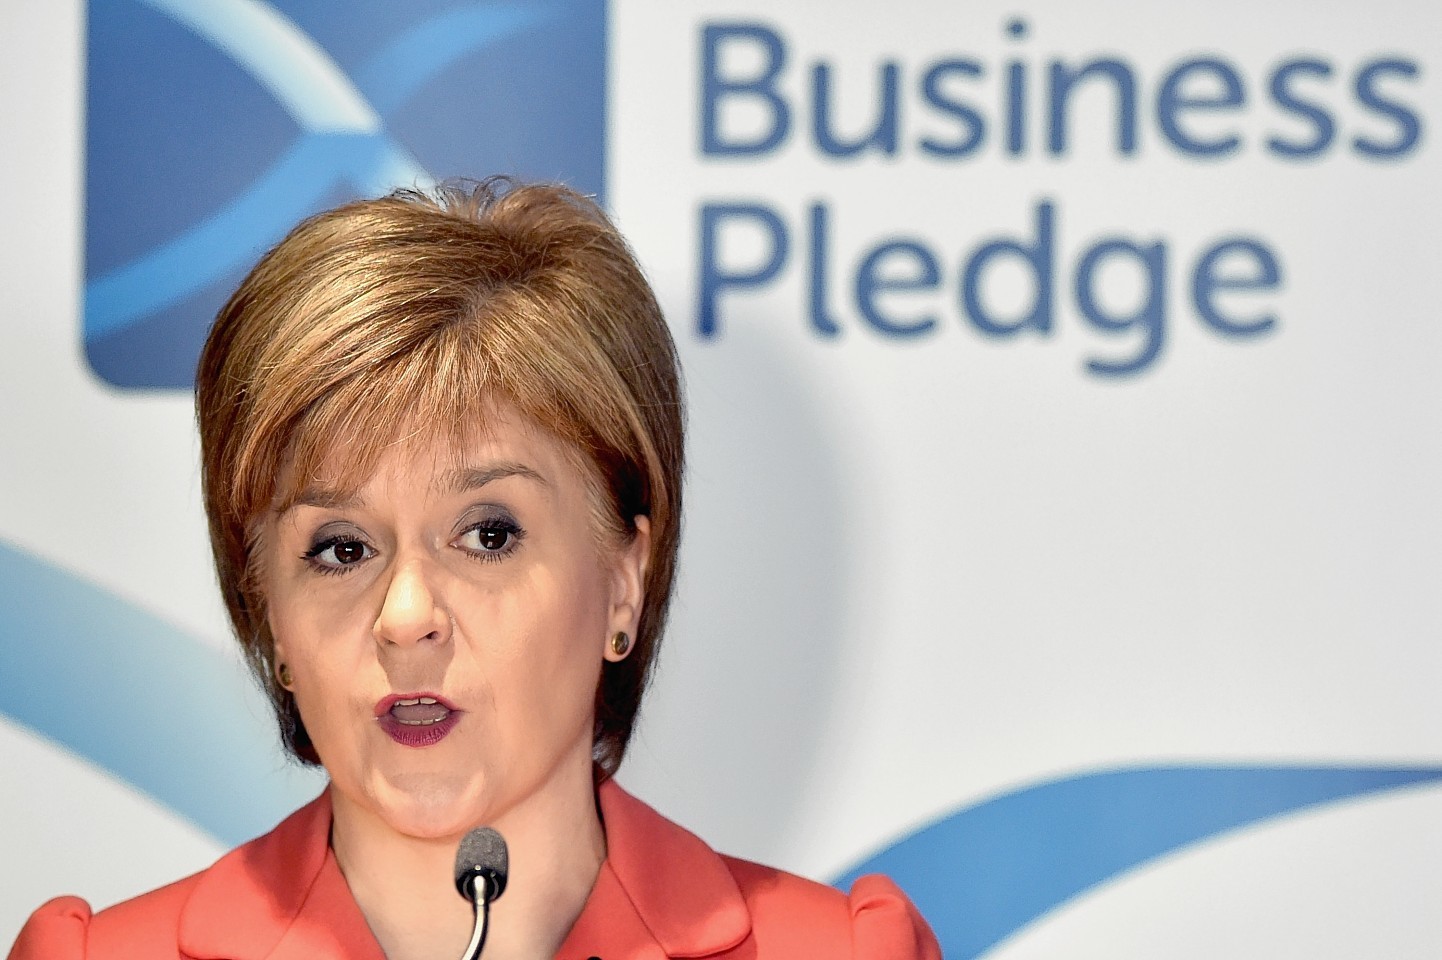 Nicola Sturgeon wants the devolved parts of the UK to have a voice in any talks to renegotiate the UK's membership of the EU.